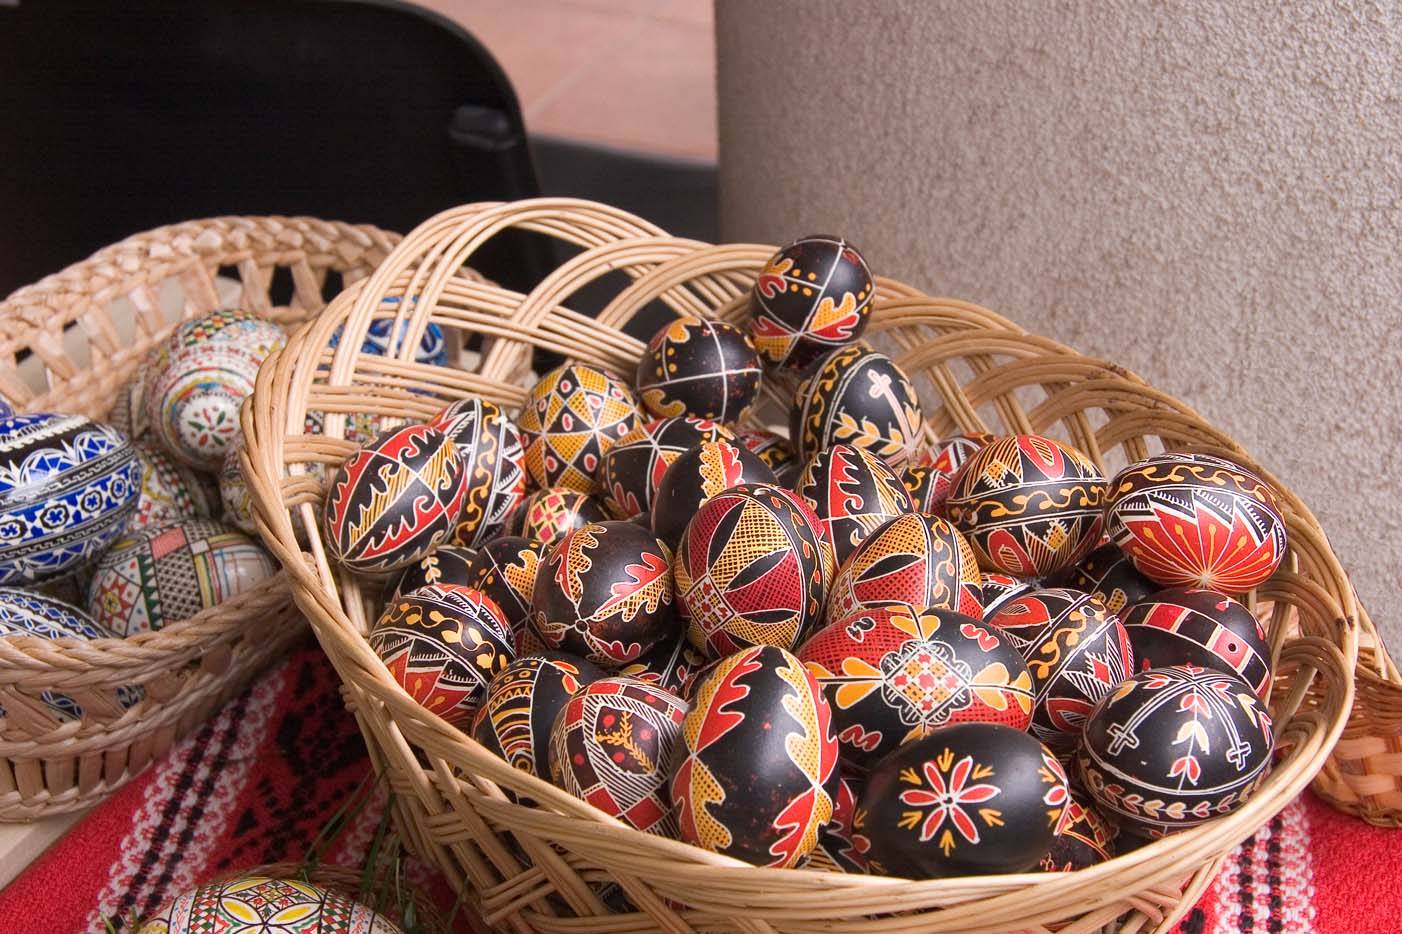 Romanian Hand Painted Easter Eggs